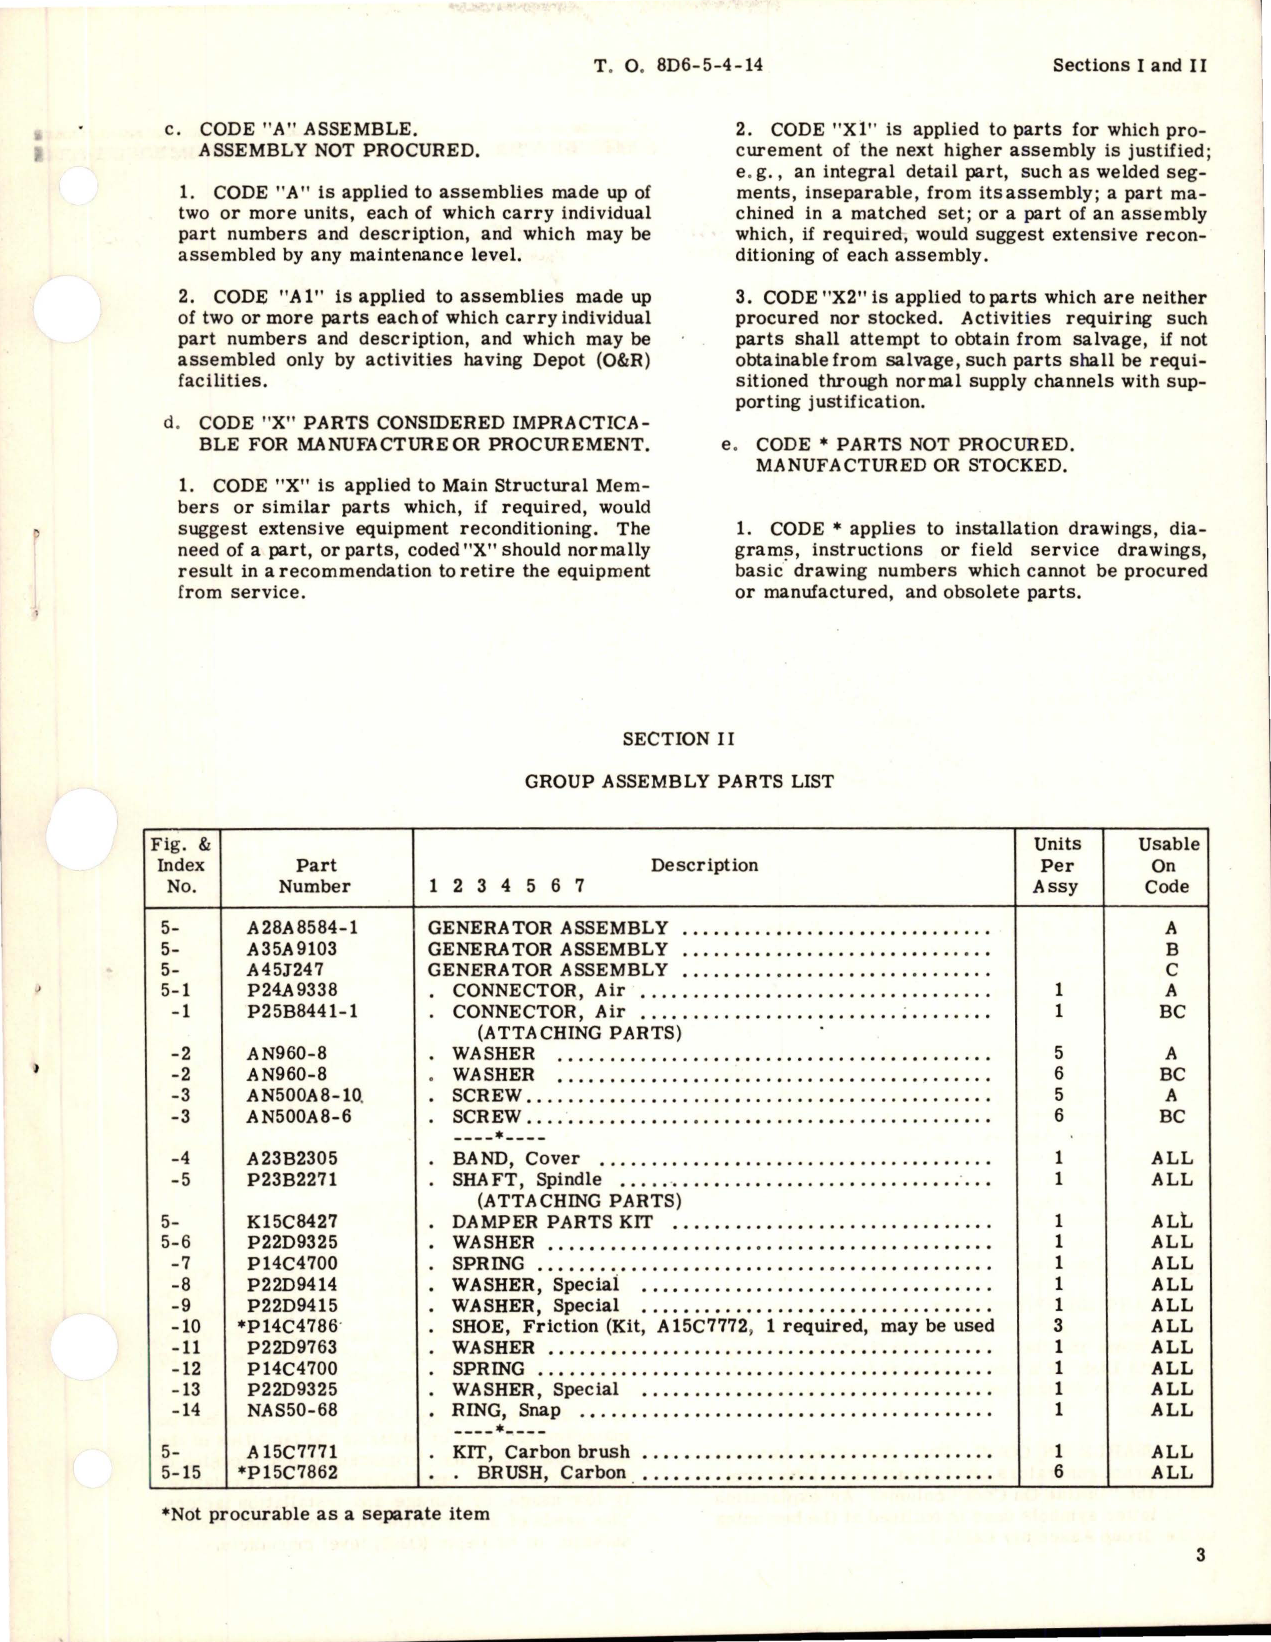 Sample page 5 from AirCorps Library document: Illustrated Parts Breakdown for DC Generators 